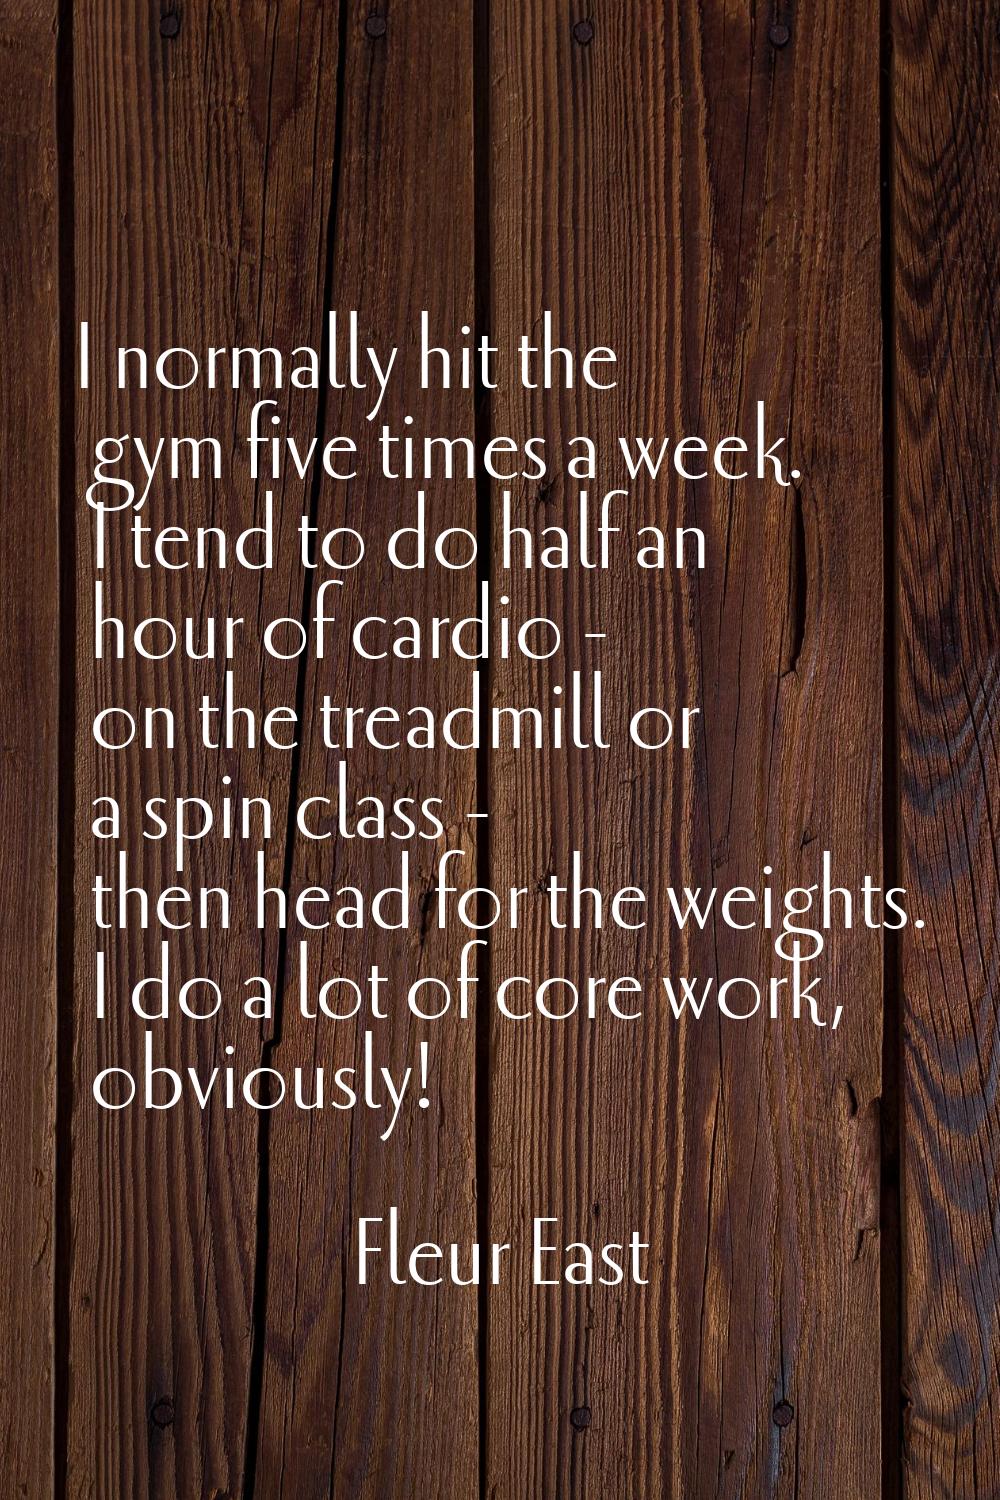 I normally hit the gym five times a week. I tend to do half an hour of cardio - on the treadmill or